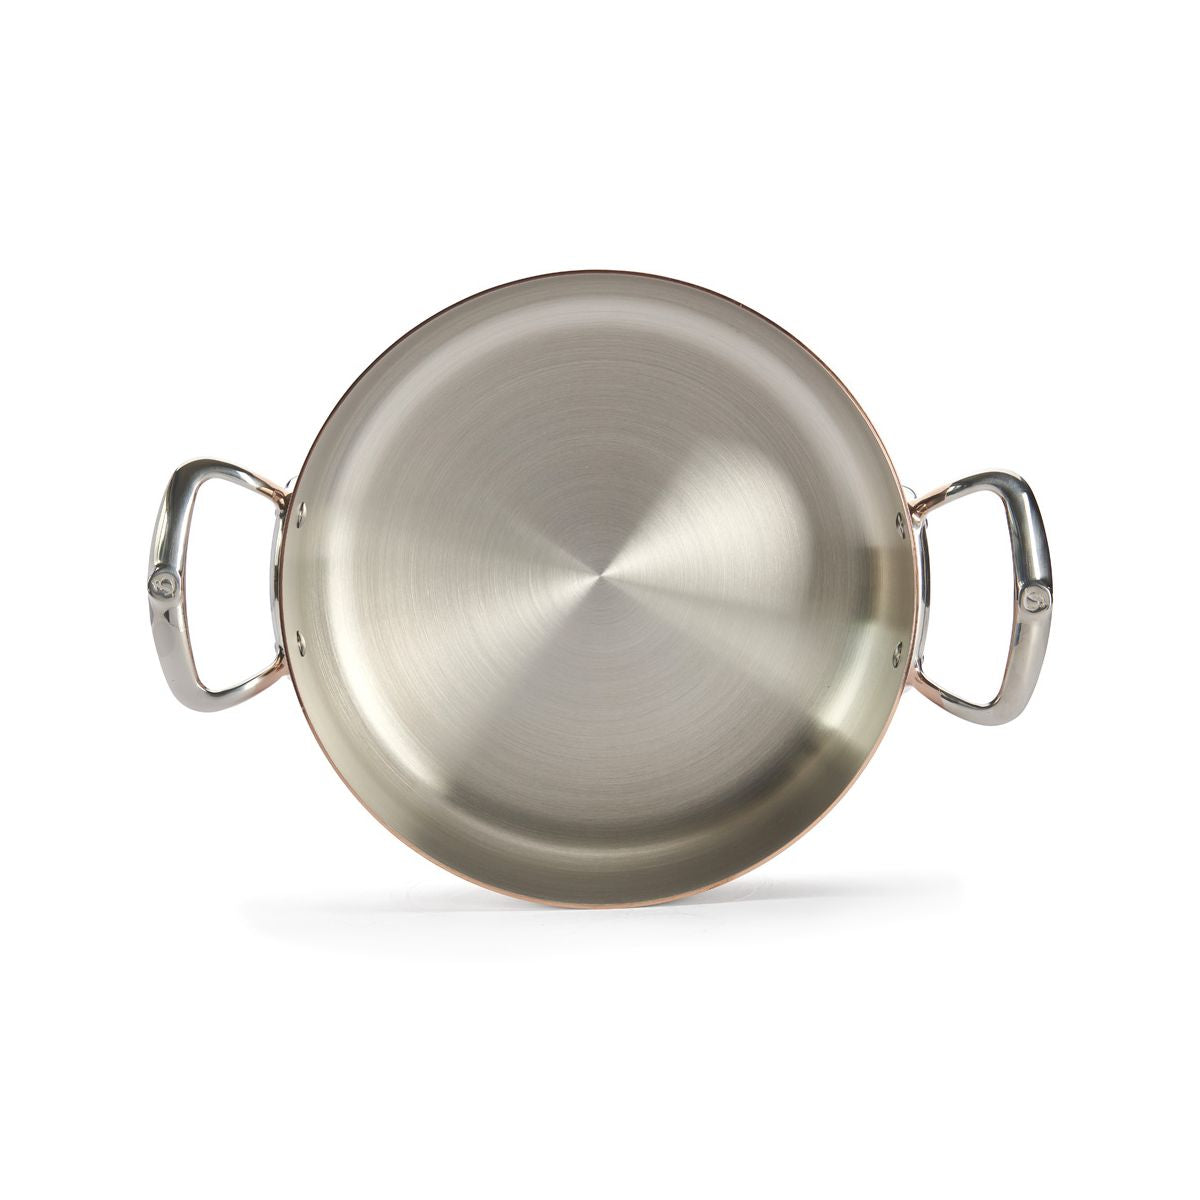 De Buyer Prima Matera sauté pan with two handles and lid